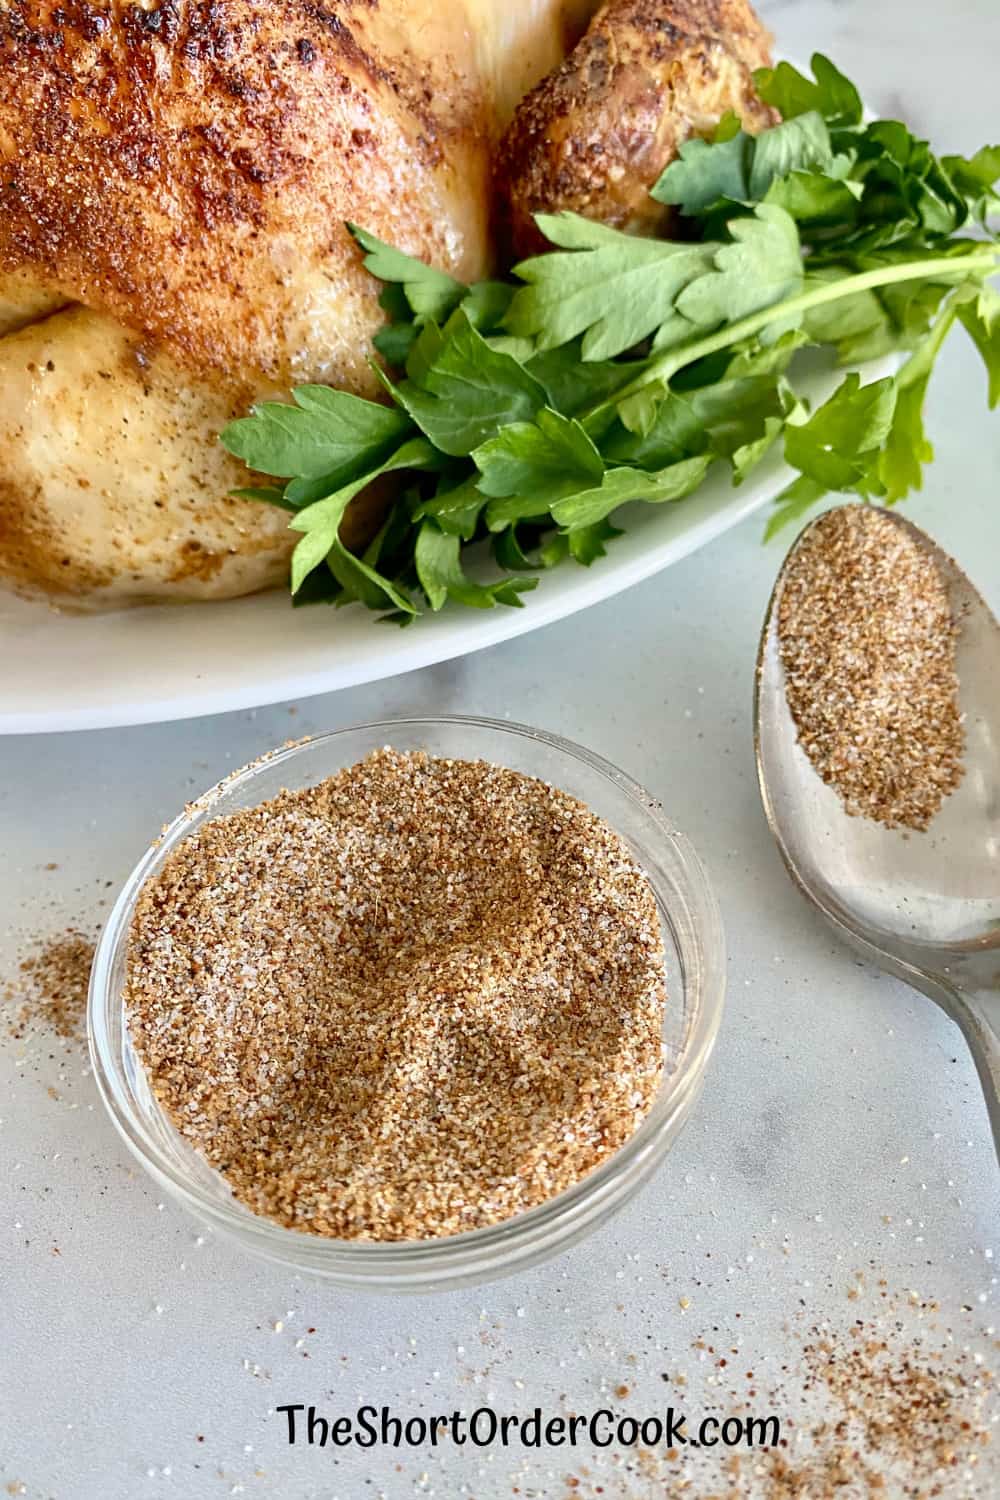 Easy Dry Rub for Whole Chicken (Smoked or Baked) closeup bowl spoon and chicken ready to eat.